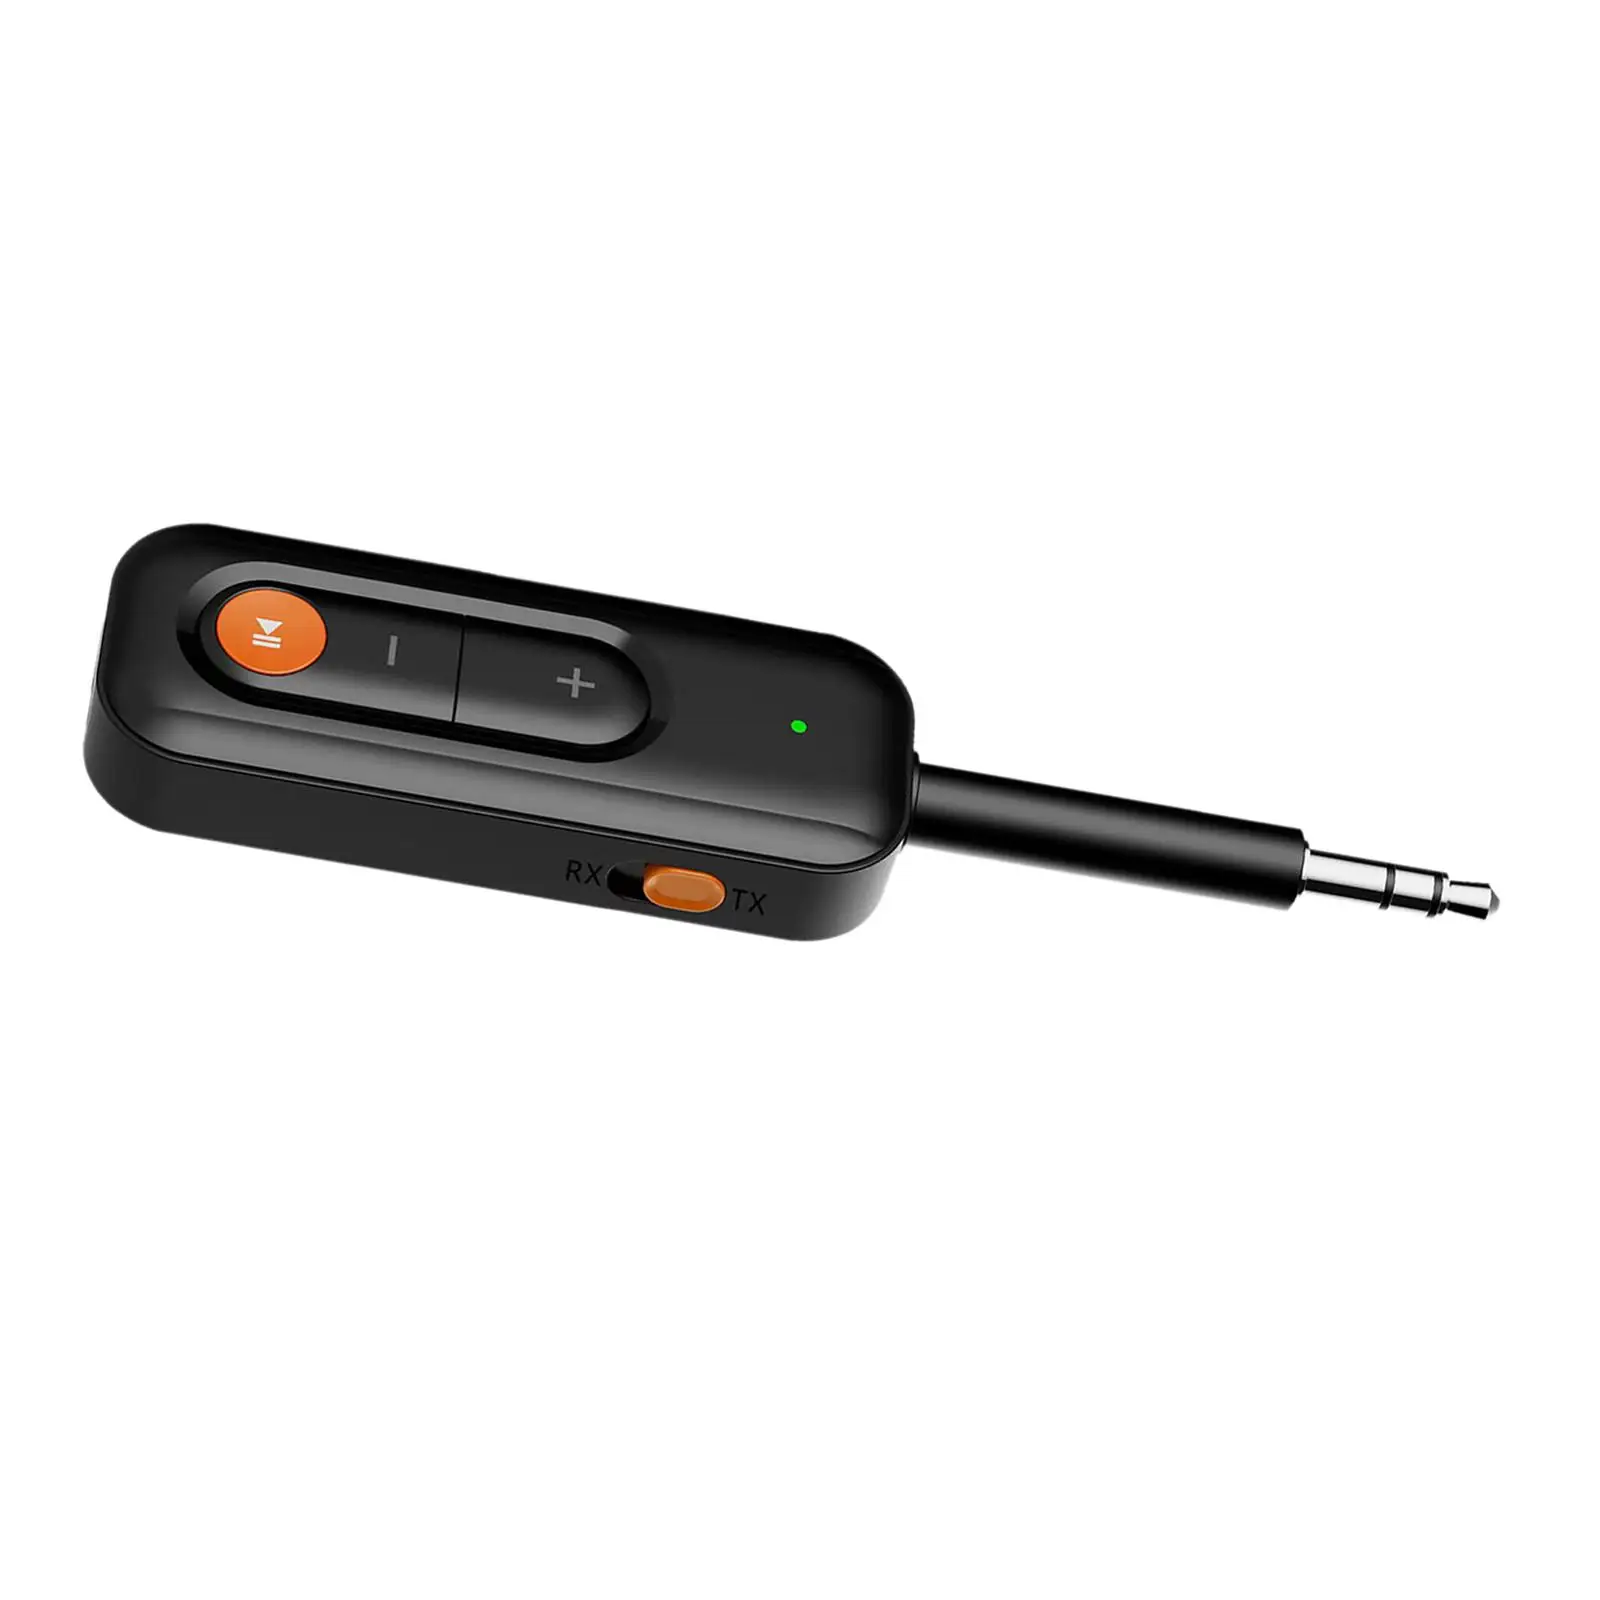 Audio Transmitter and Receiver Transceiver Hands Free Call 3.5mm 2 in 1 Car AUX Audio Adapter for Car Stereo Computers Earphones